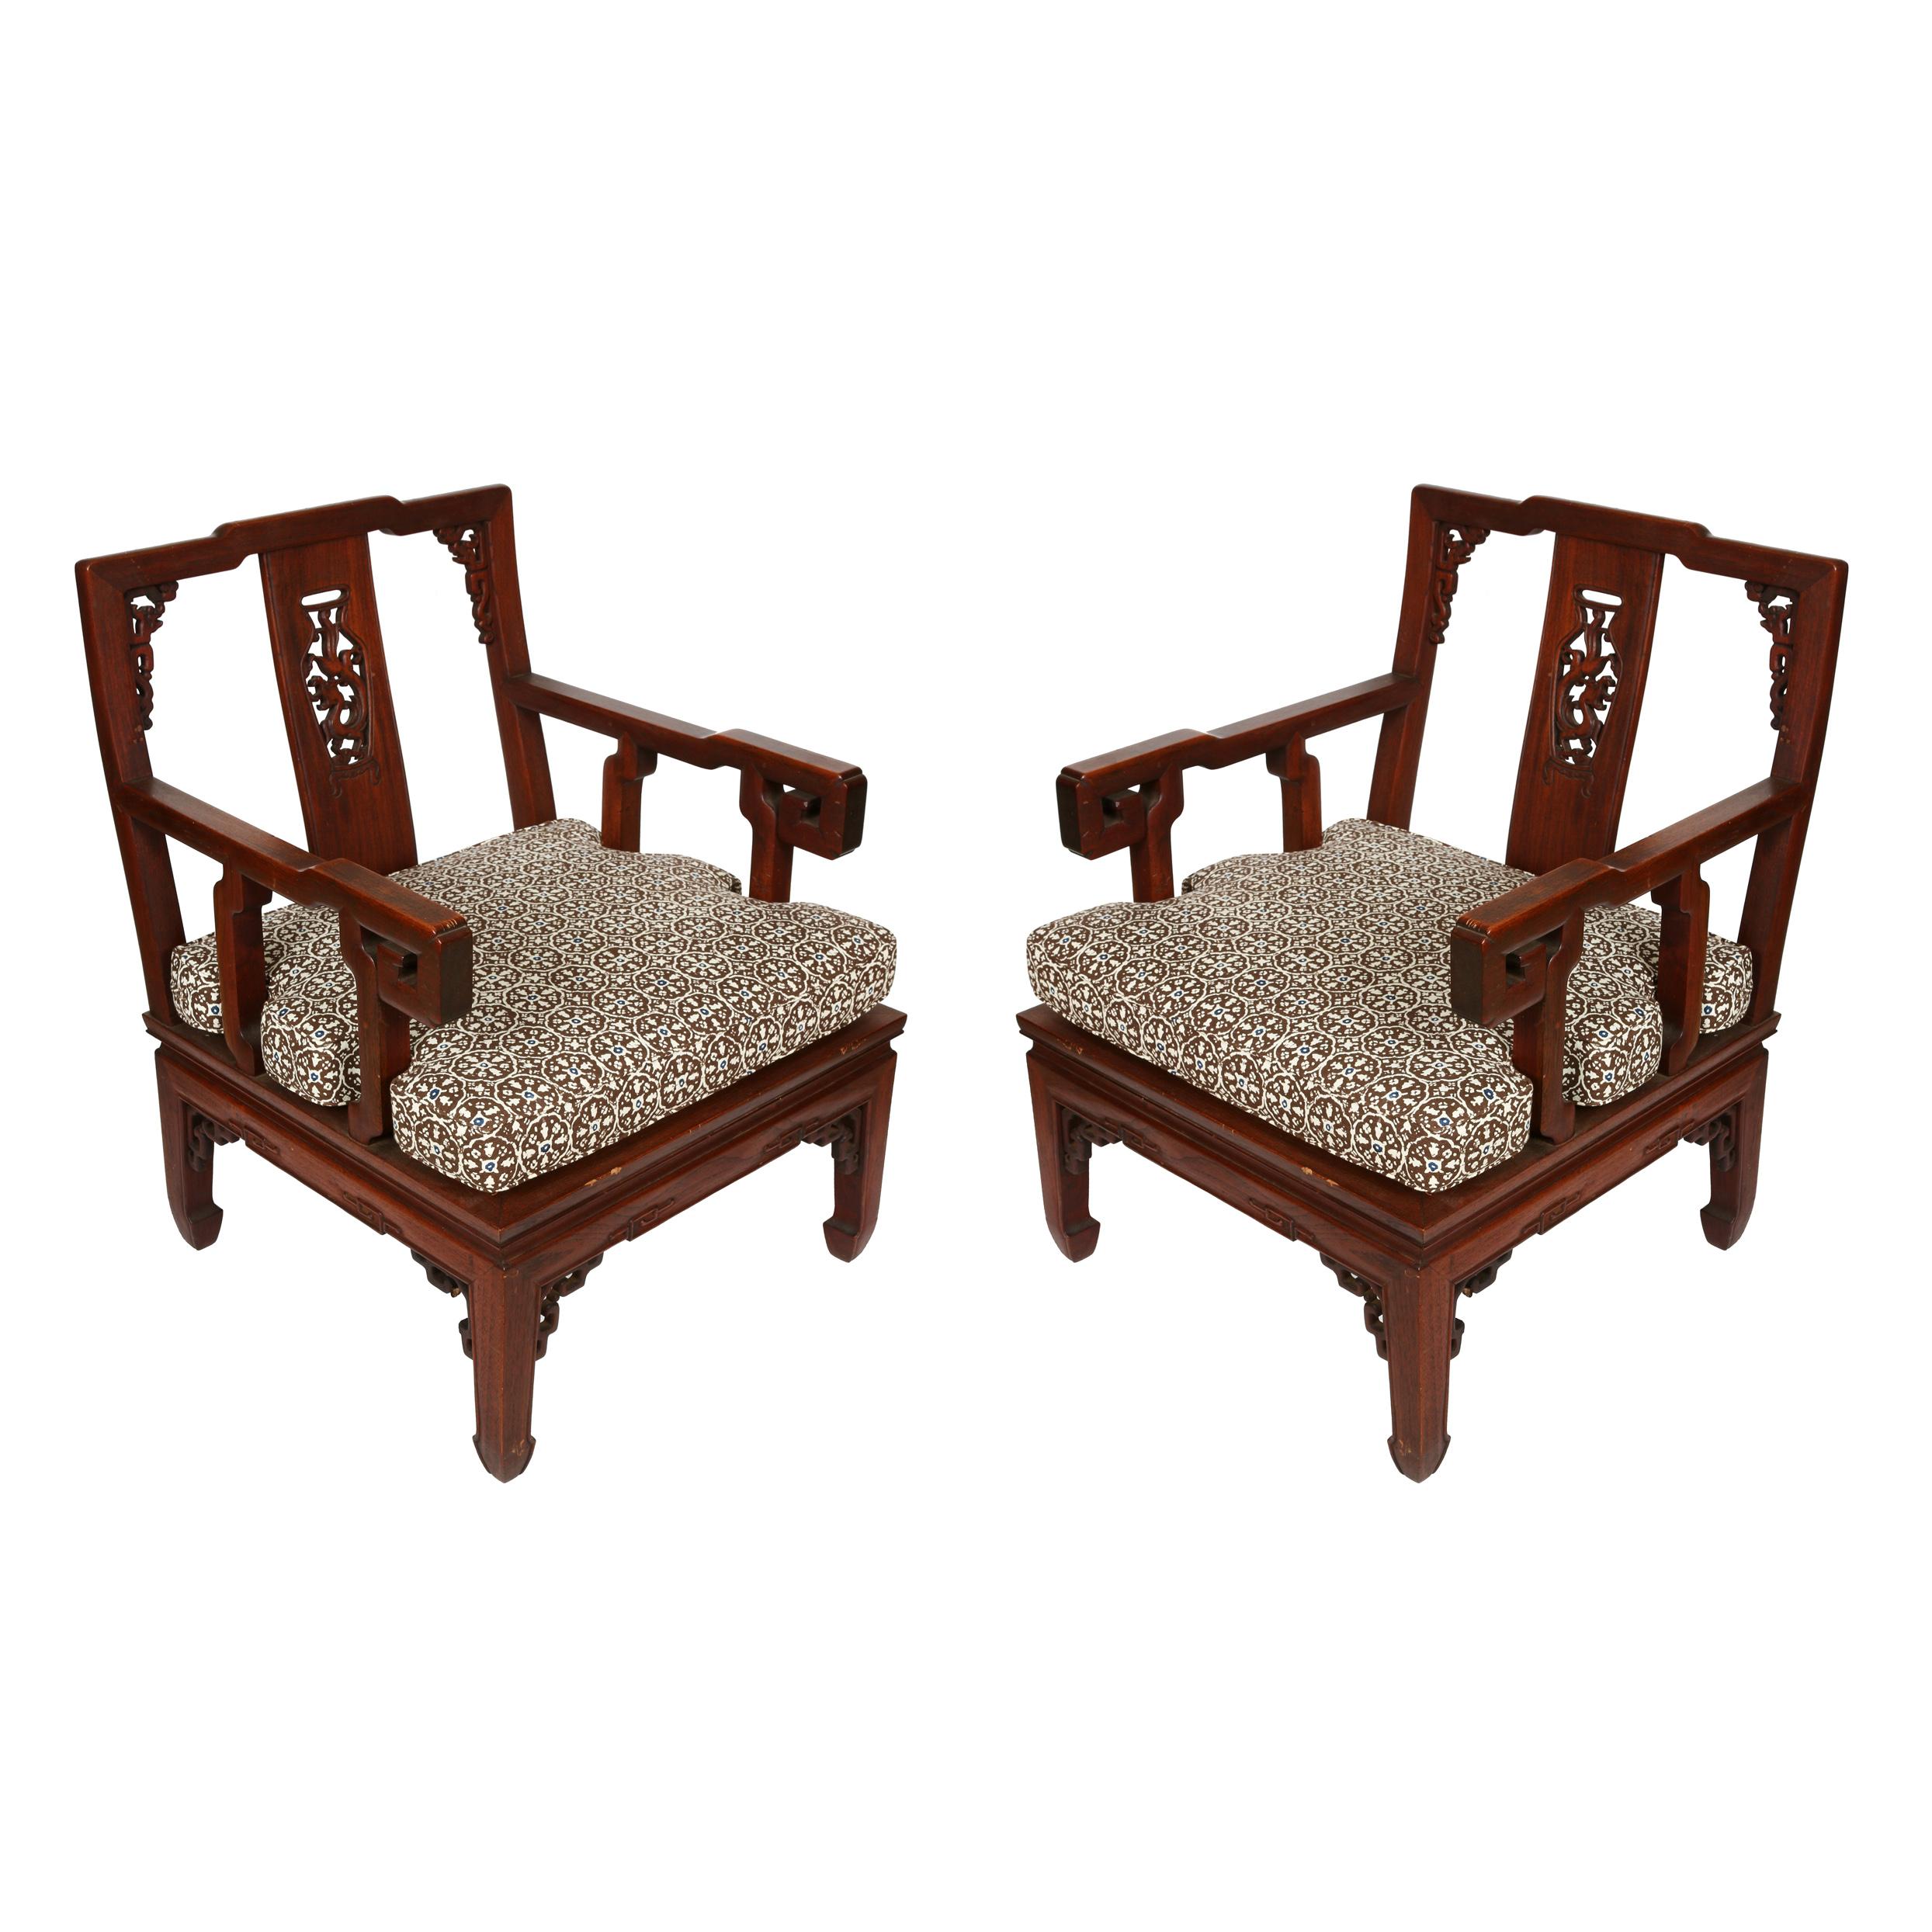 A pair of Asian carved hardwood chairs with tailored cushions.